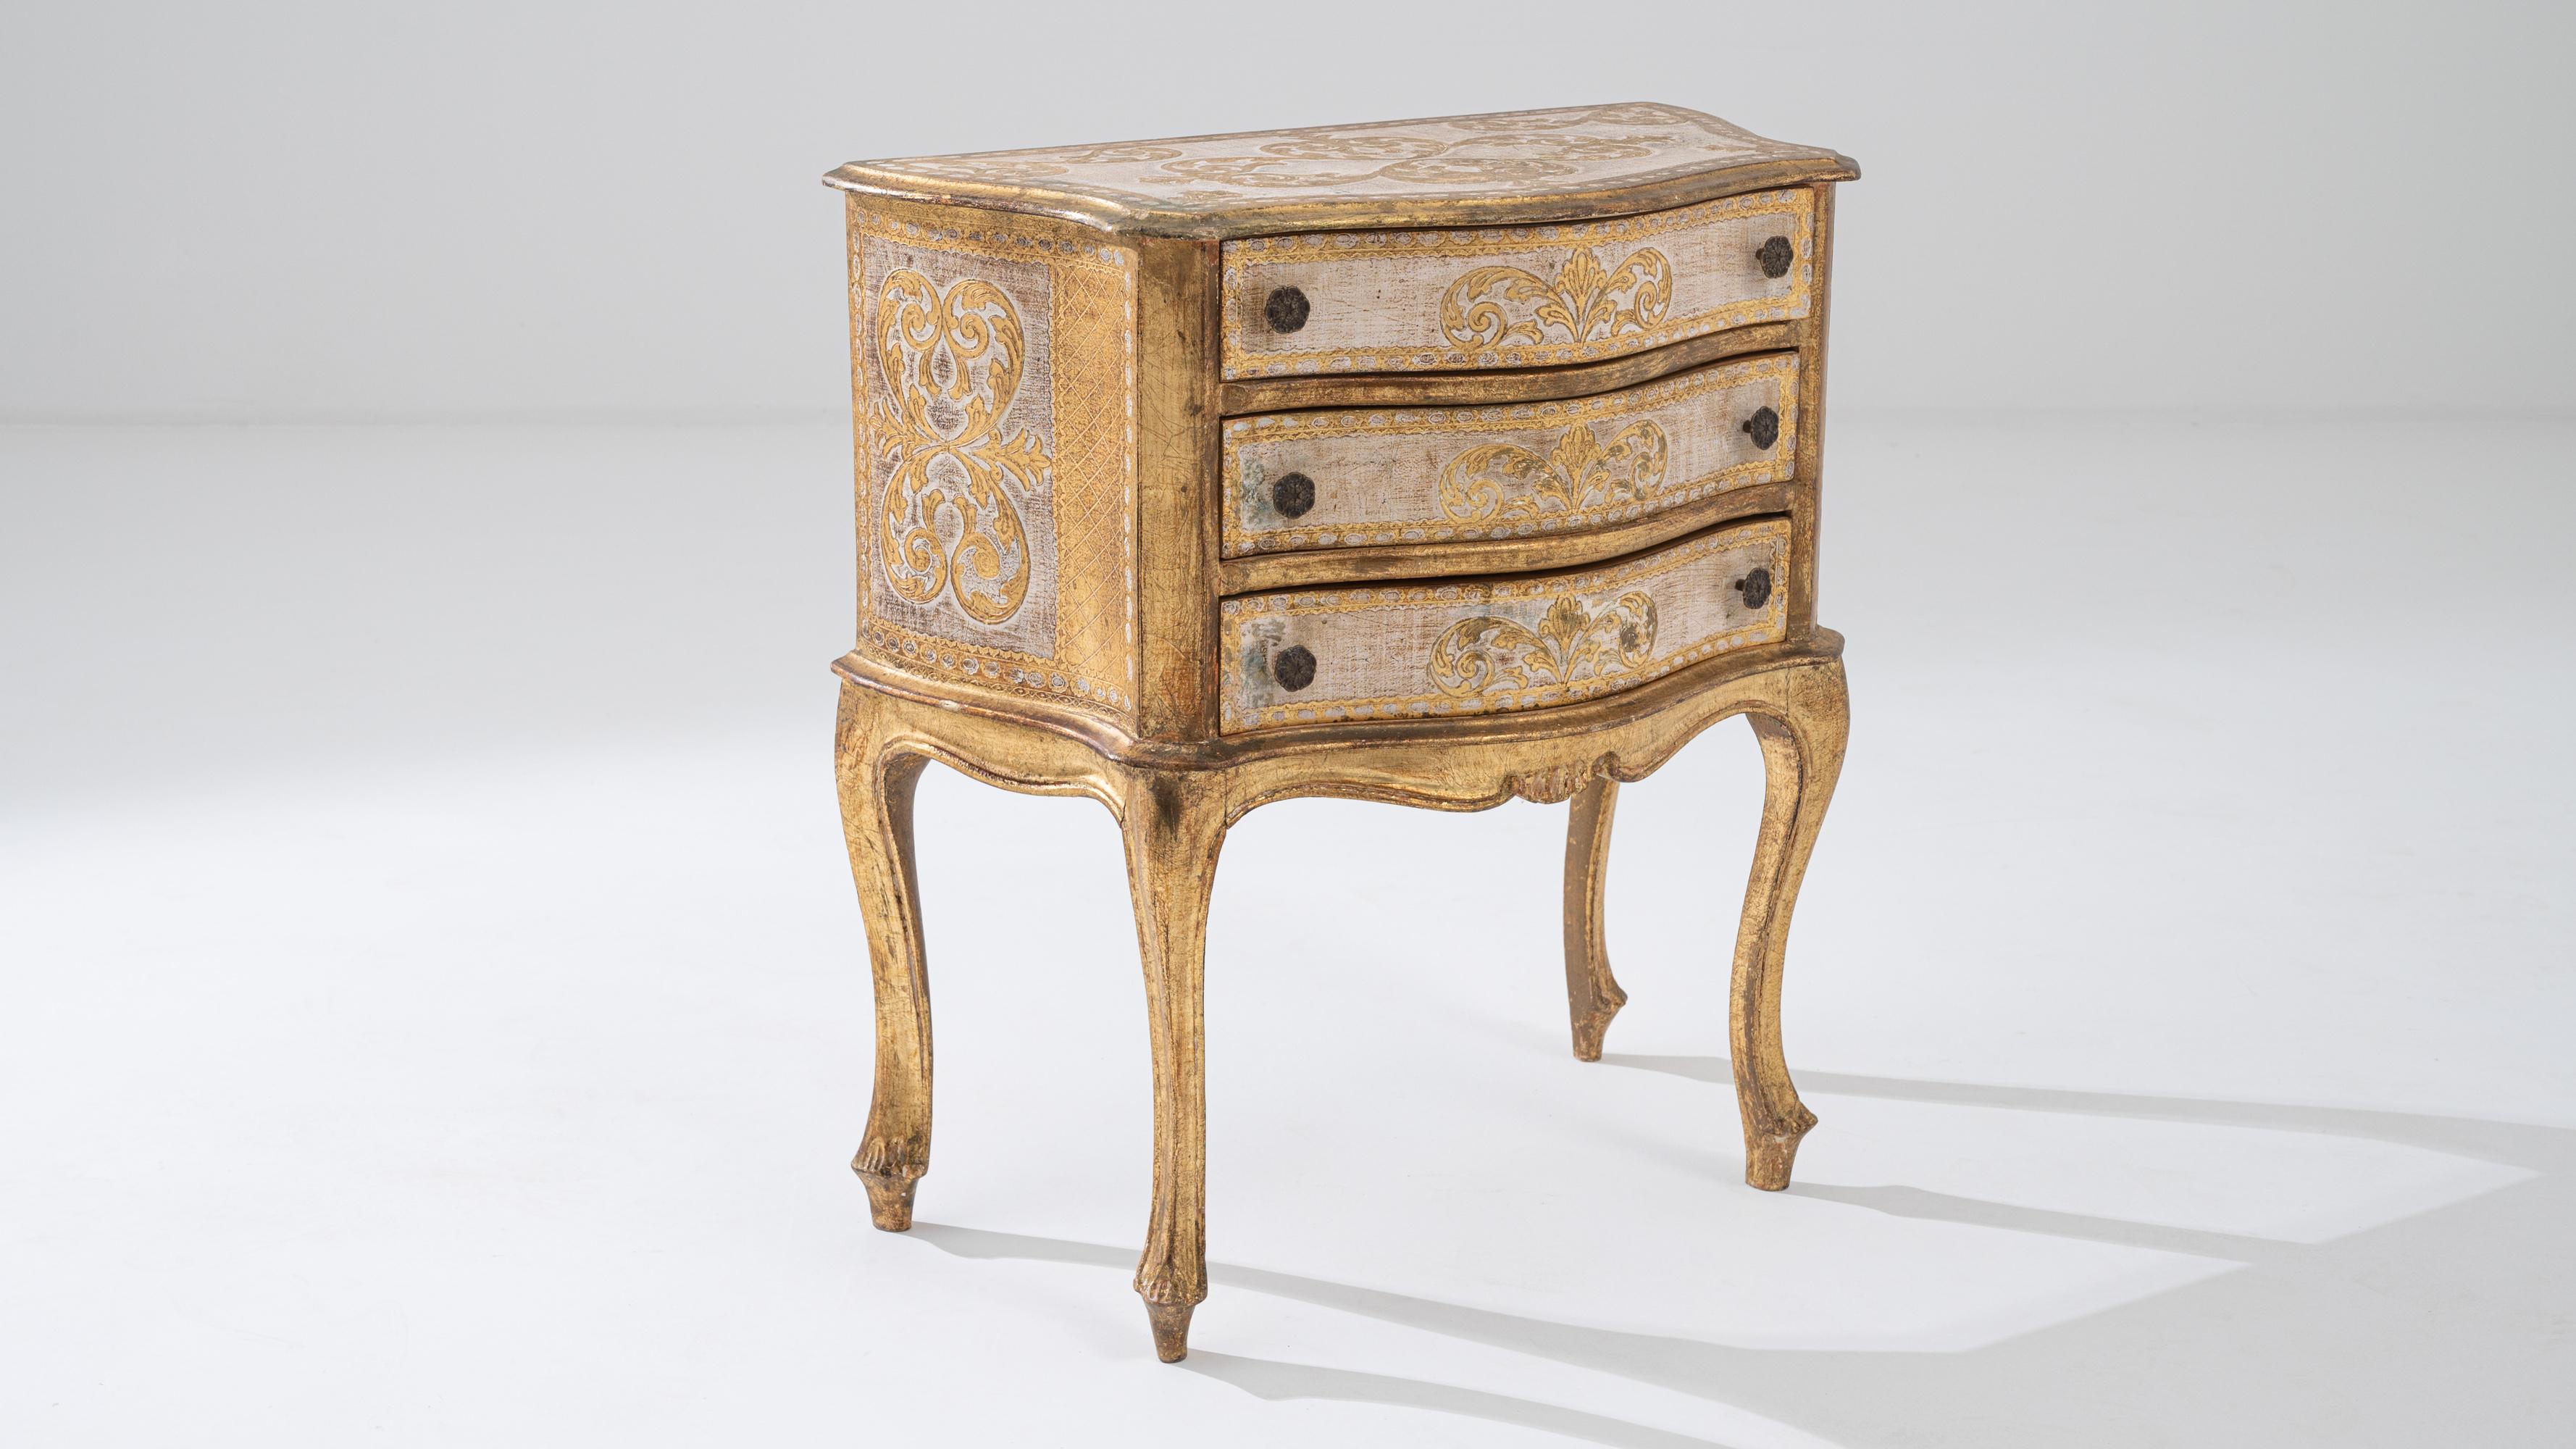 Immerse yourself in the timeless allure of the Renaissance Era with this opulent 20th Century Italian Wood Patinated Chest of Drawers. Boasting luxurious gold and cream tones, this vintage chest is a masterpiece of design. The intricate scrollwork